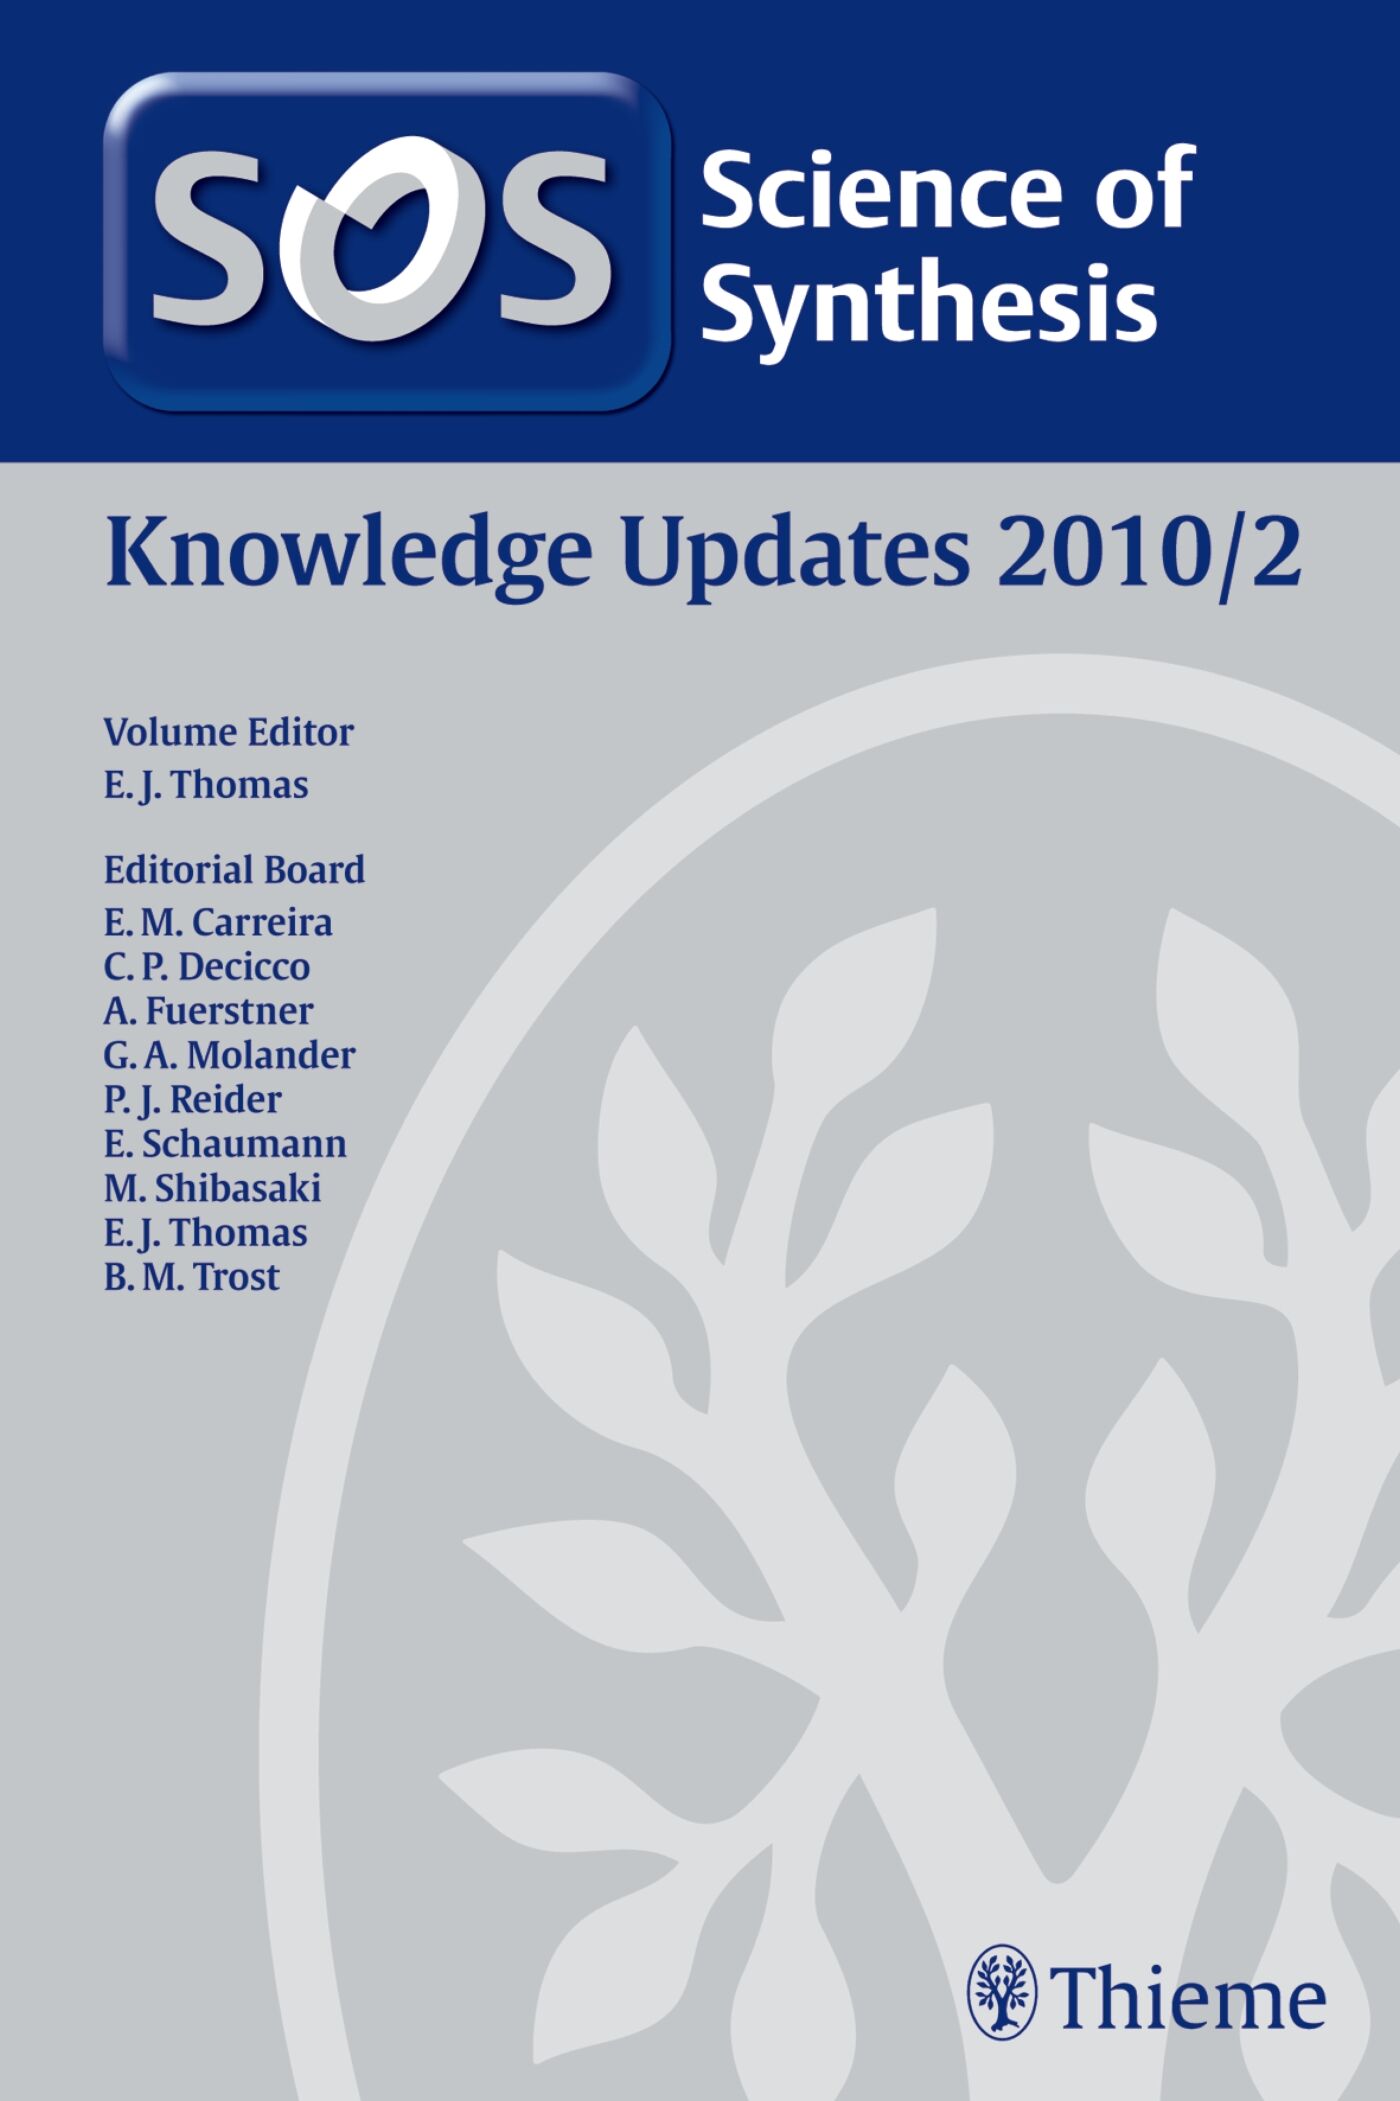 Science of Synthesis Knowledge Updates 2010 Vol. 2, 9783131541512